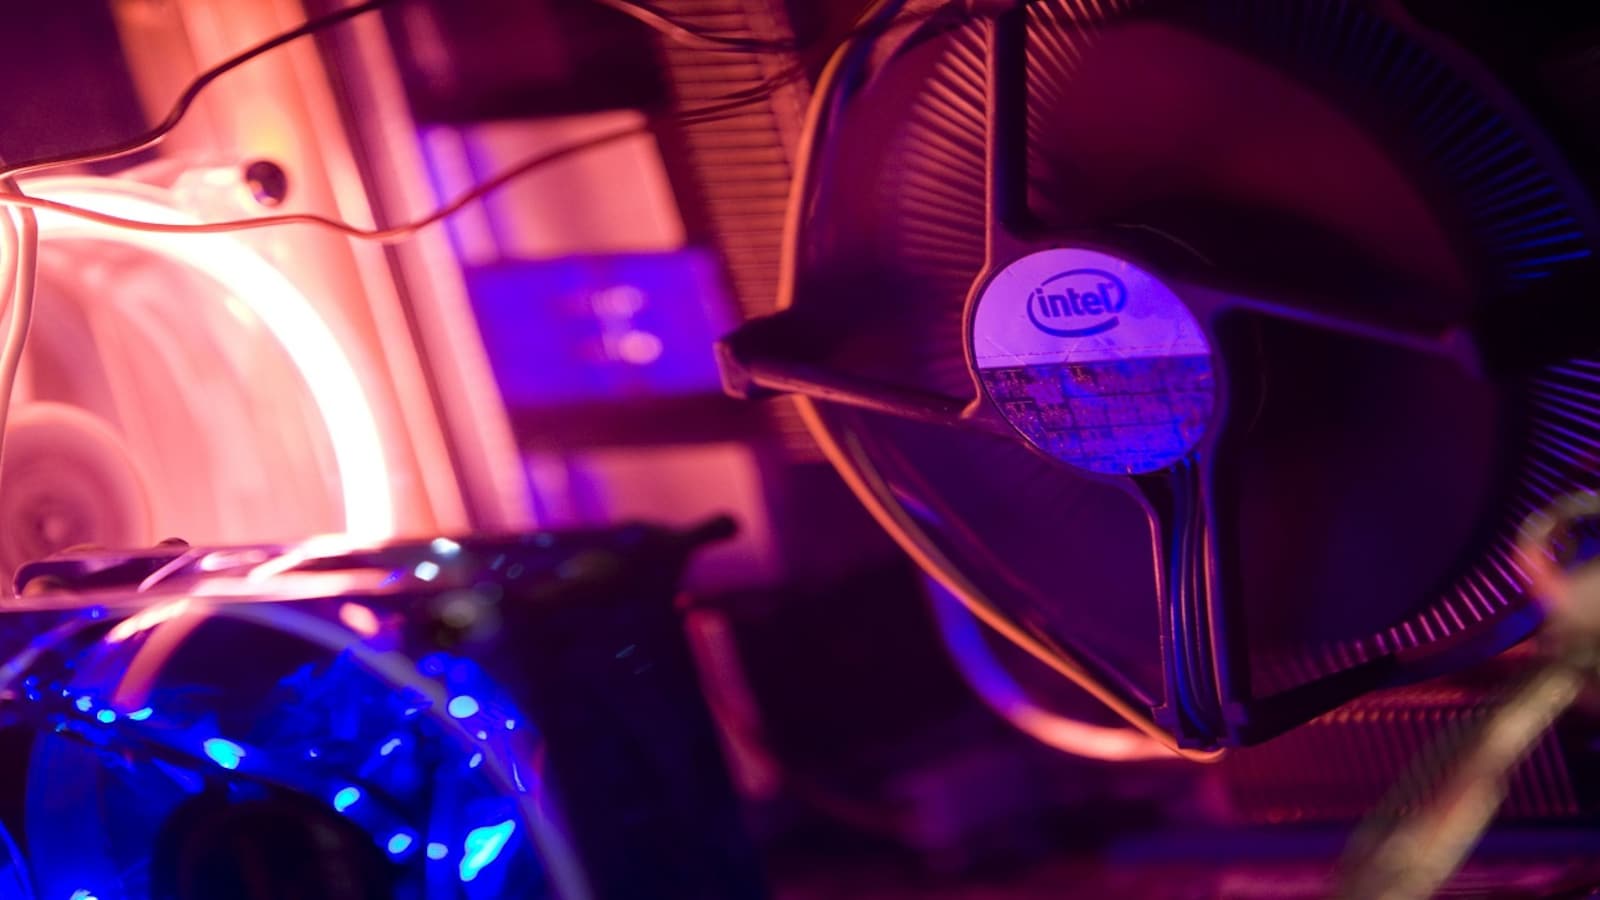 intel slashes ceo pay by 25% as part of companywide cuts